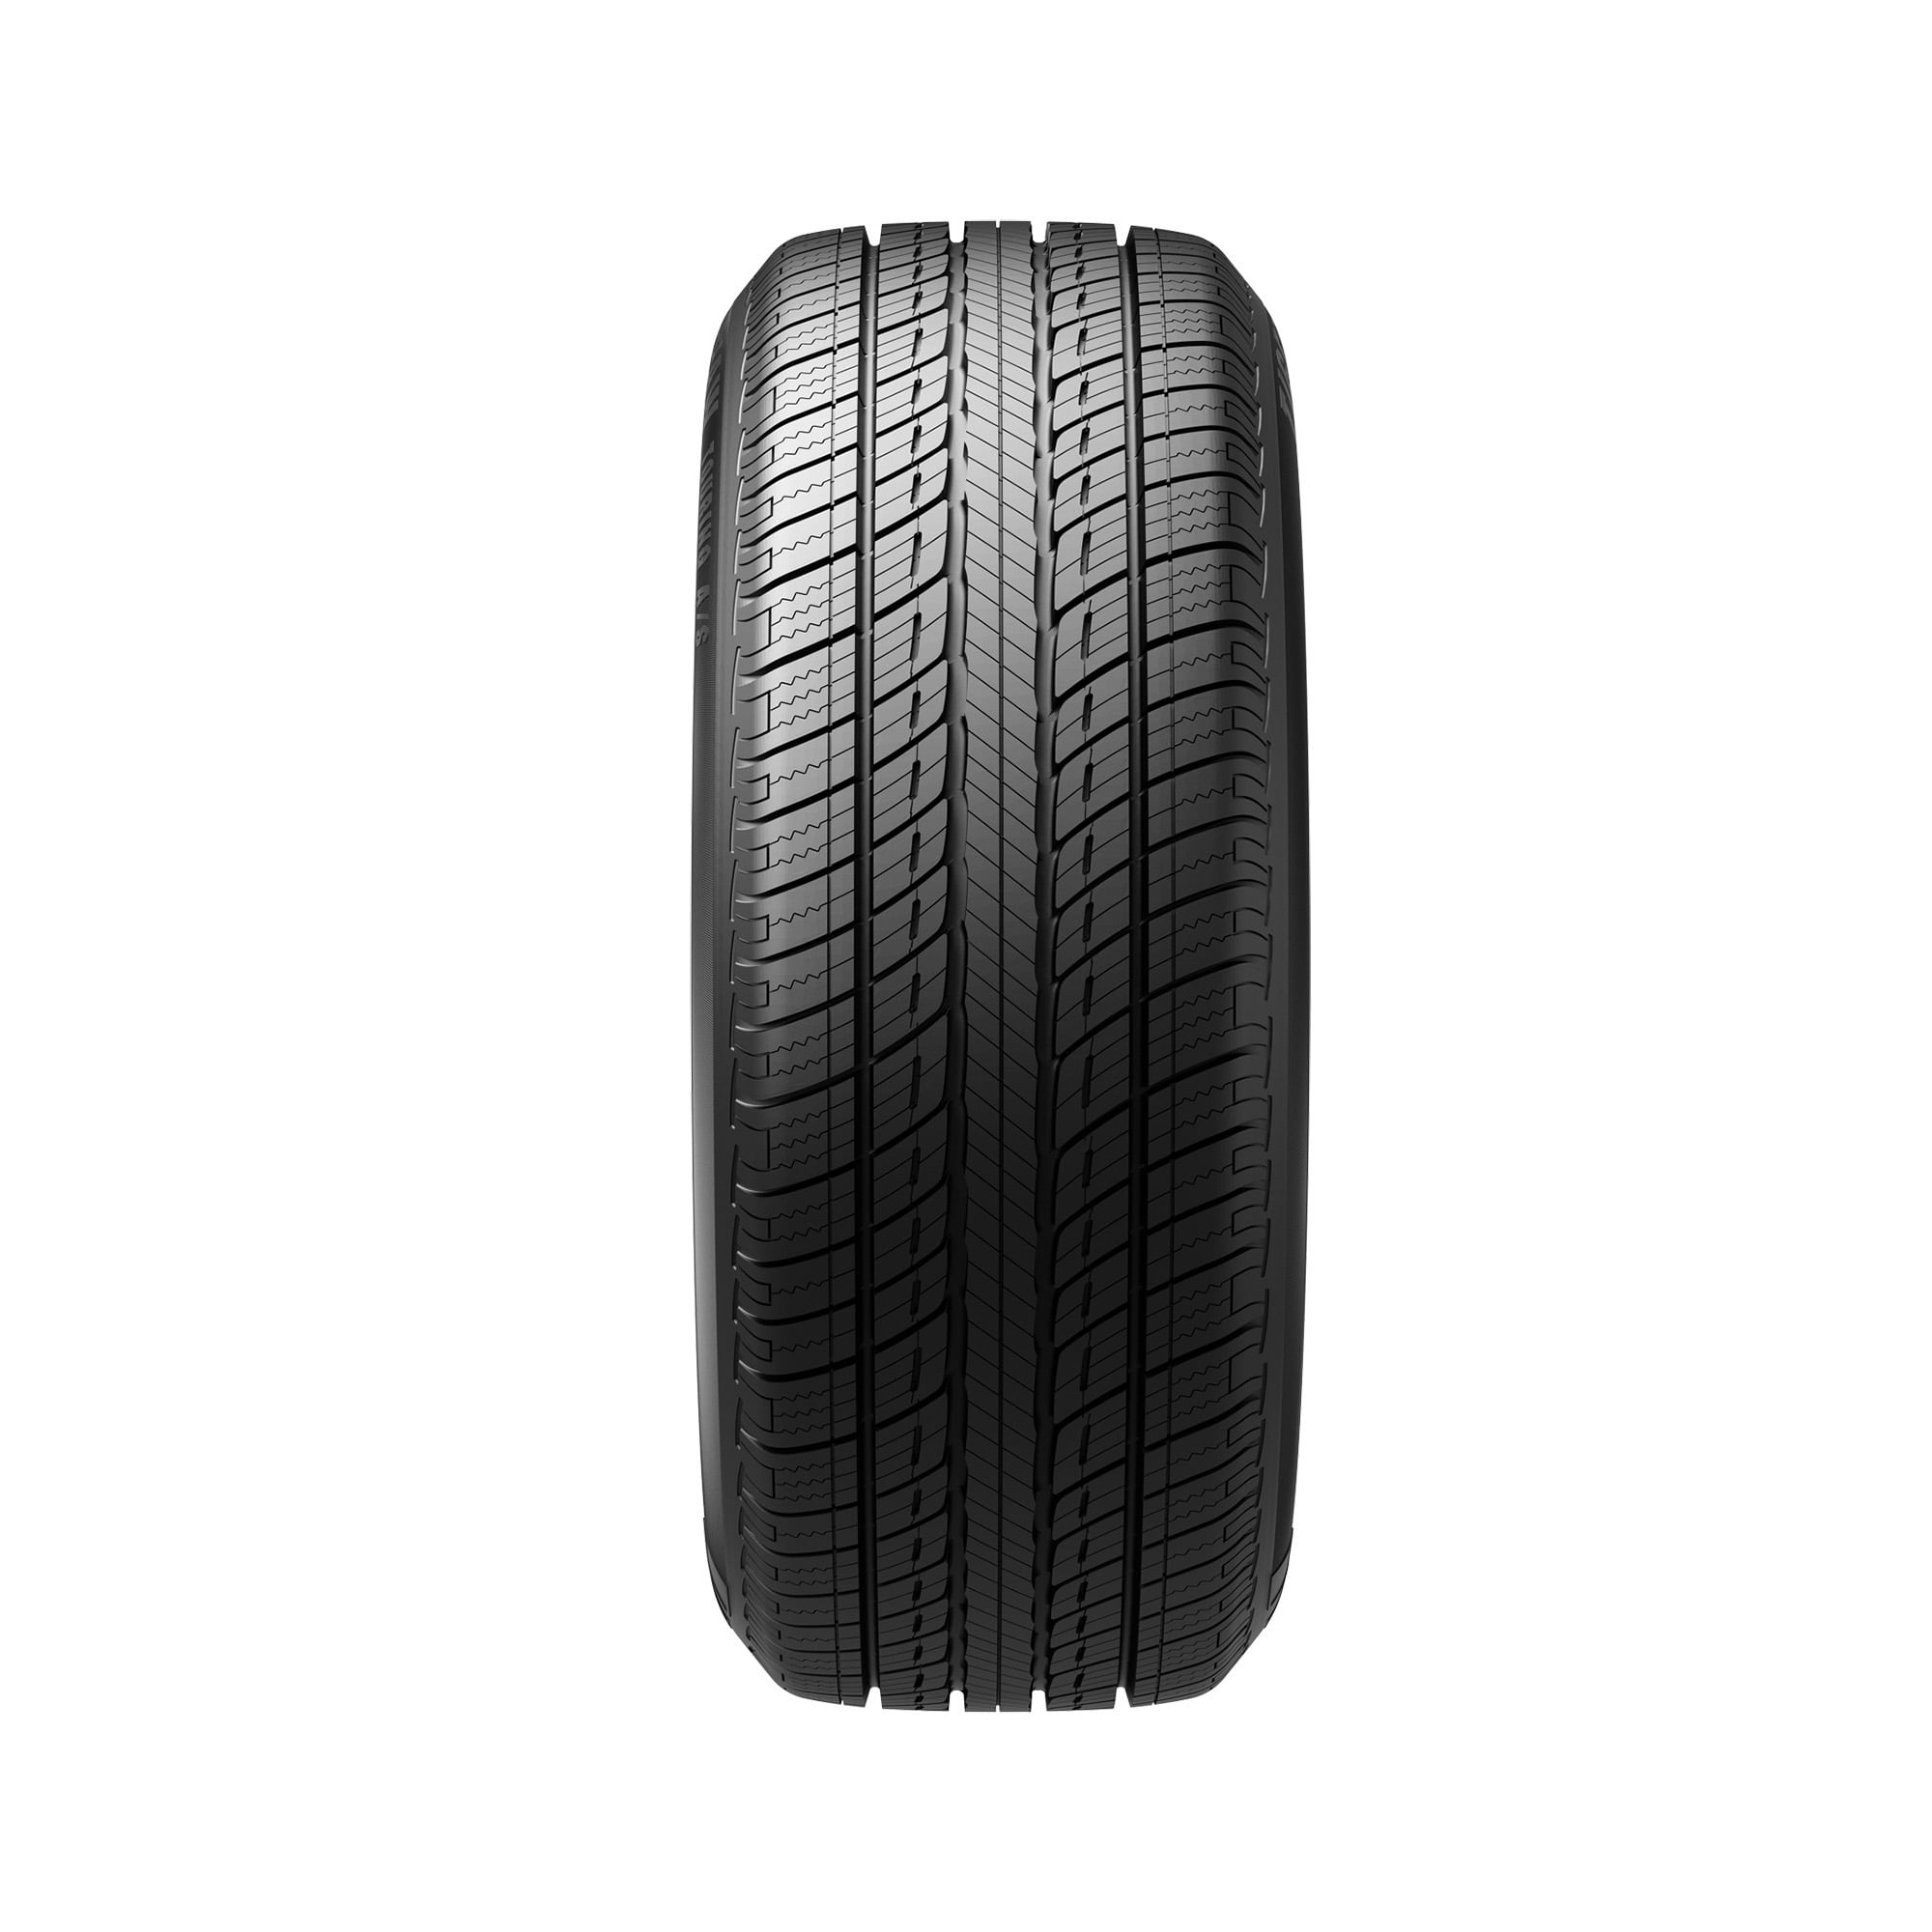 Ice Honda Accord Tire Fits: 2013-20 215/60R16 95T 3 Paw LX-P Ford Passenger 2008-12 S, Snow Winter Tiger & Fusion Uniroyal